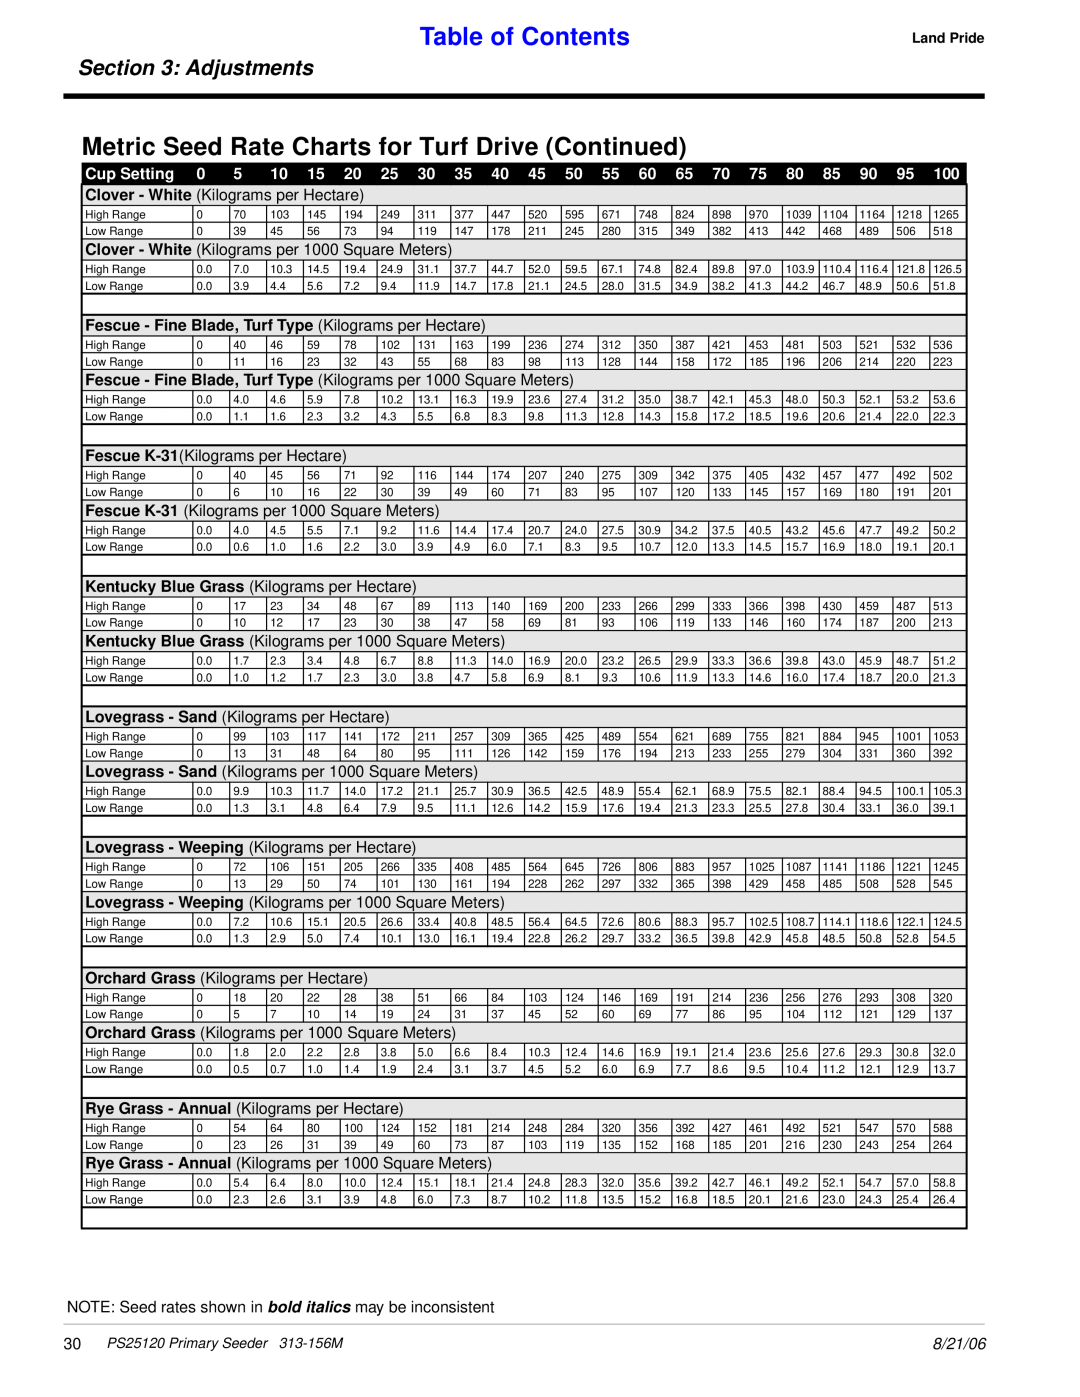 Land Pride PS25120 manual Metric Seed Rate Charts for Turf Drive Continued, Table of Contents, Adjustments, Clover - White 